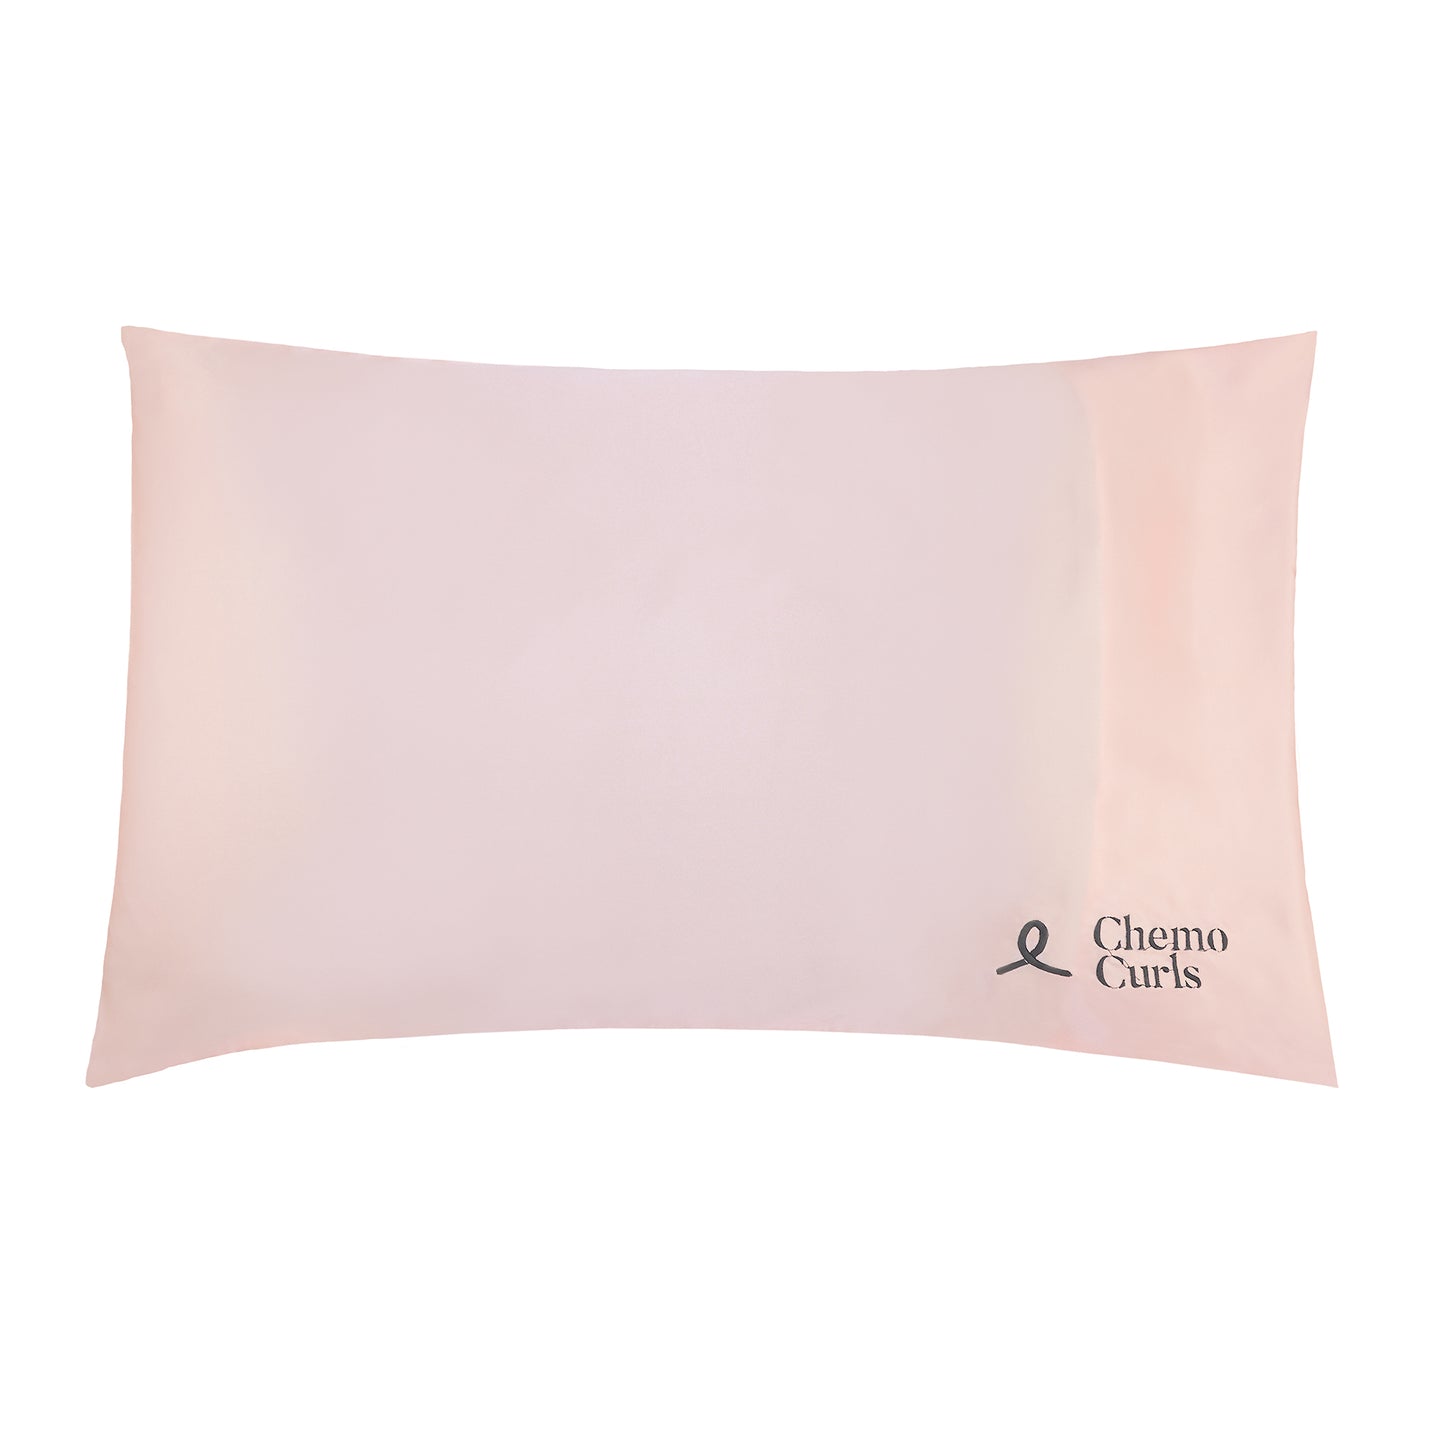 An image of a pink satin pillowcase with a sleek and smooth surface. The soft pink color of the pillowcase exudes elegance and sophistication. The Chemo Curls logo is skillfully embroidered in black thread on the lower left corner, adding a personalized touch. The satin fabric catches the light, creating a subtle sheen and highlighting the luxurious texture. This image portrays a sense of comfort, style, and attention to detail.